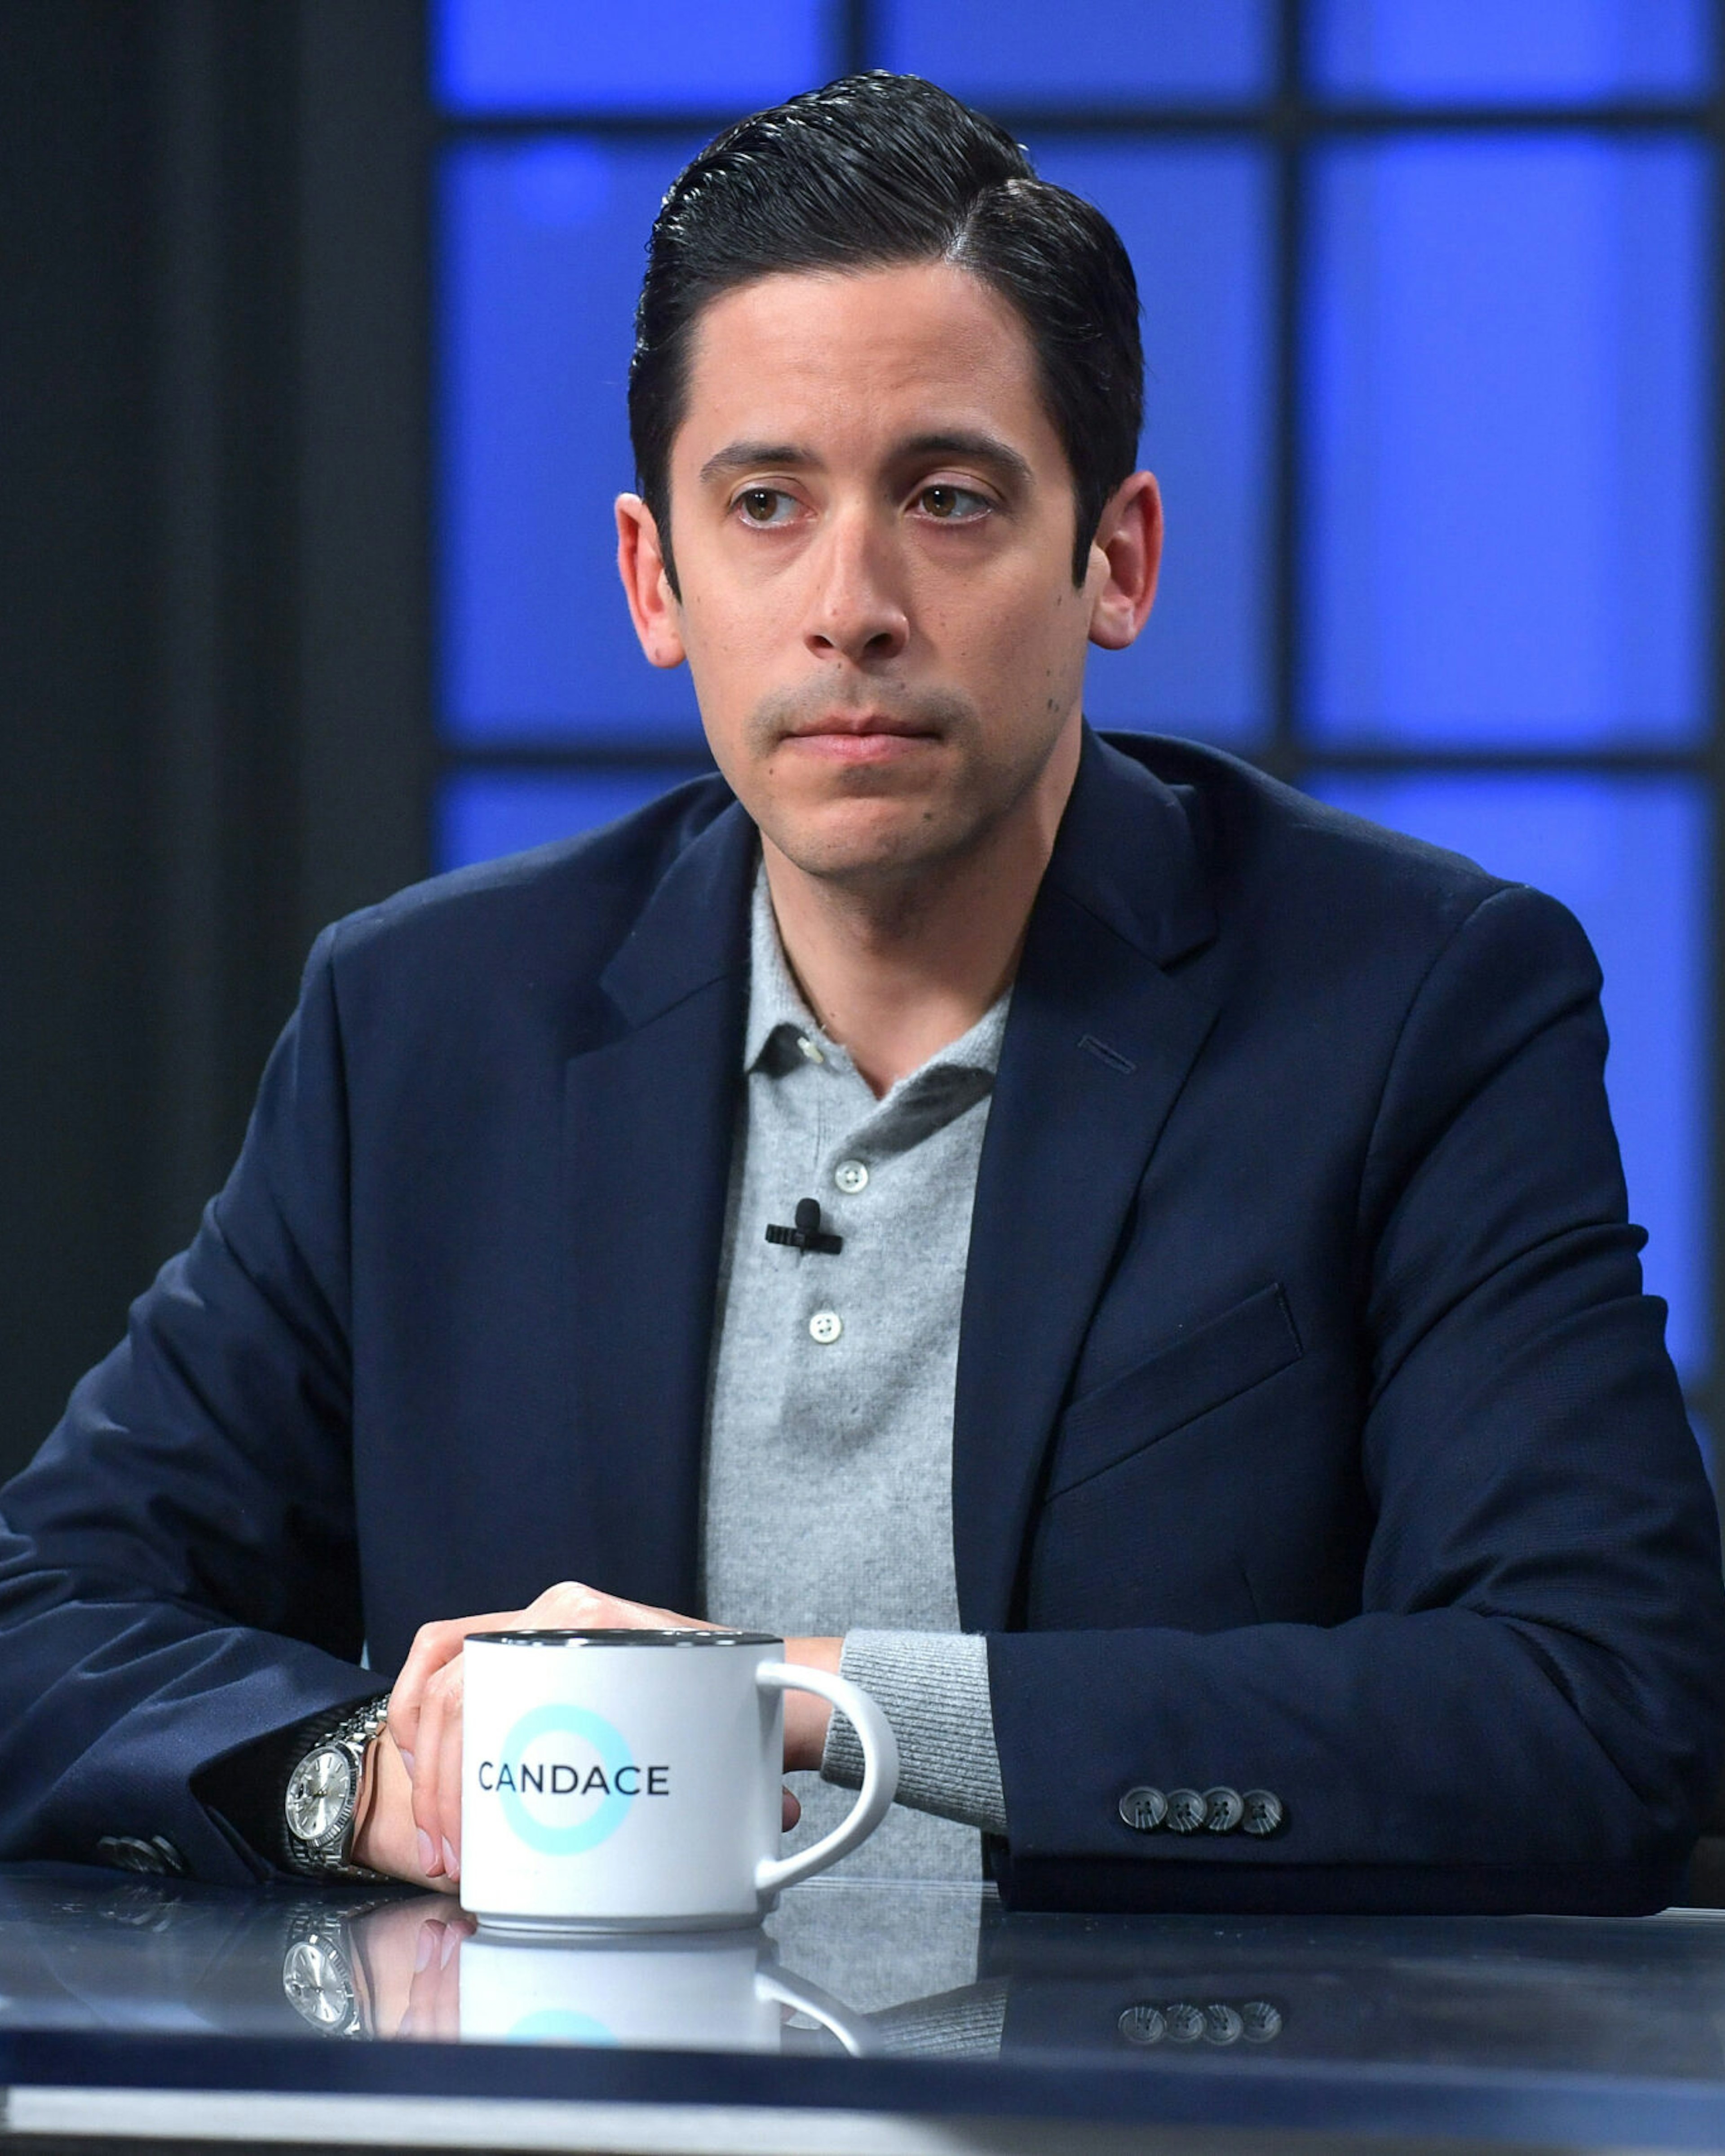 NASHVILLE, TENNESSEE - APRIL 19: Michael Knowles is seen on set of "Candace" on April 19, 2022 in Nashville, Tennessee. This episode will air Tuesday, April 26, 2022 (Photo by Jason Davis/Getty Images)